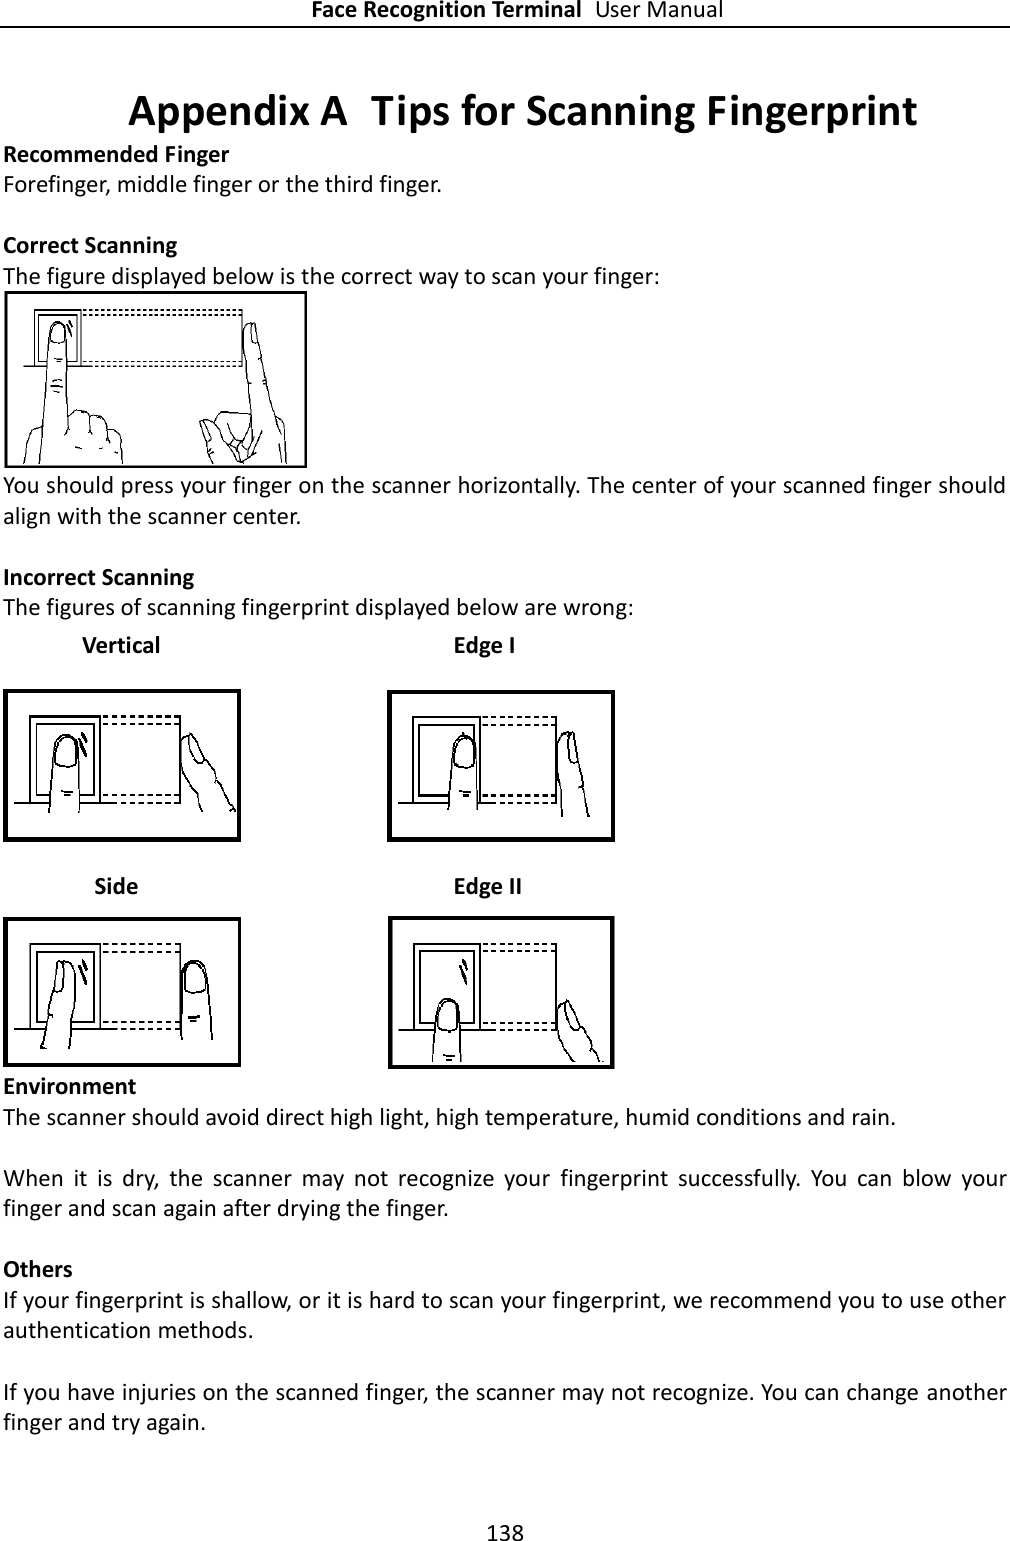 Face Recognition Terminal User Manual 138  Appendix A  Tips for Scanning Fingerprint Recommended Finger Forefinger, middle finger or the third finger.  Correct Scanning The figure displayed below is the correct way to scan your finger:  You should press your finger on the scanner horizontally. The center of your scanned finger should align with the scanner center.  Incorrect Scanning The figures of scanning fingerprint displayed below are wrong:  Environment The scanner should avoid direct high light, high temperature, humid conditions and rain.    When  it  is  dry,  the  scanner  may  not  recognize  your  fingerprint  successfully.  You  can  blow  your finger and scan again after drying the finger.  Others If your fingerprint is shallow, or it is hard to scan your fingerprint, we recommend you to use other authentication methods.  If you have injuries on the scanned finger, the scanner may not recognize. You can change another finger and try again. Side  Edge II Vertical Edge I 